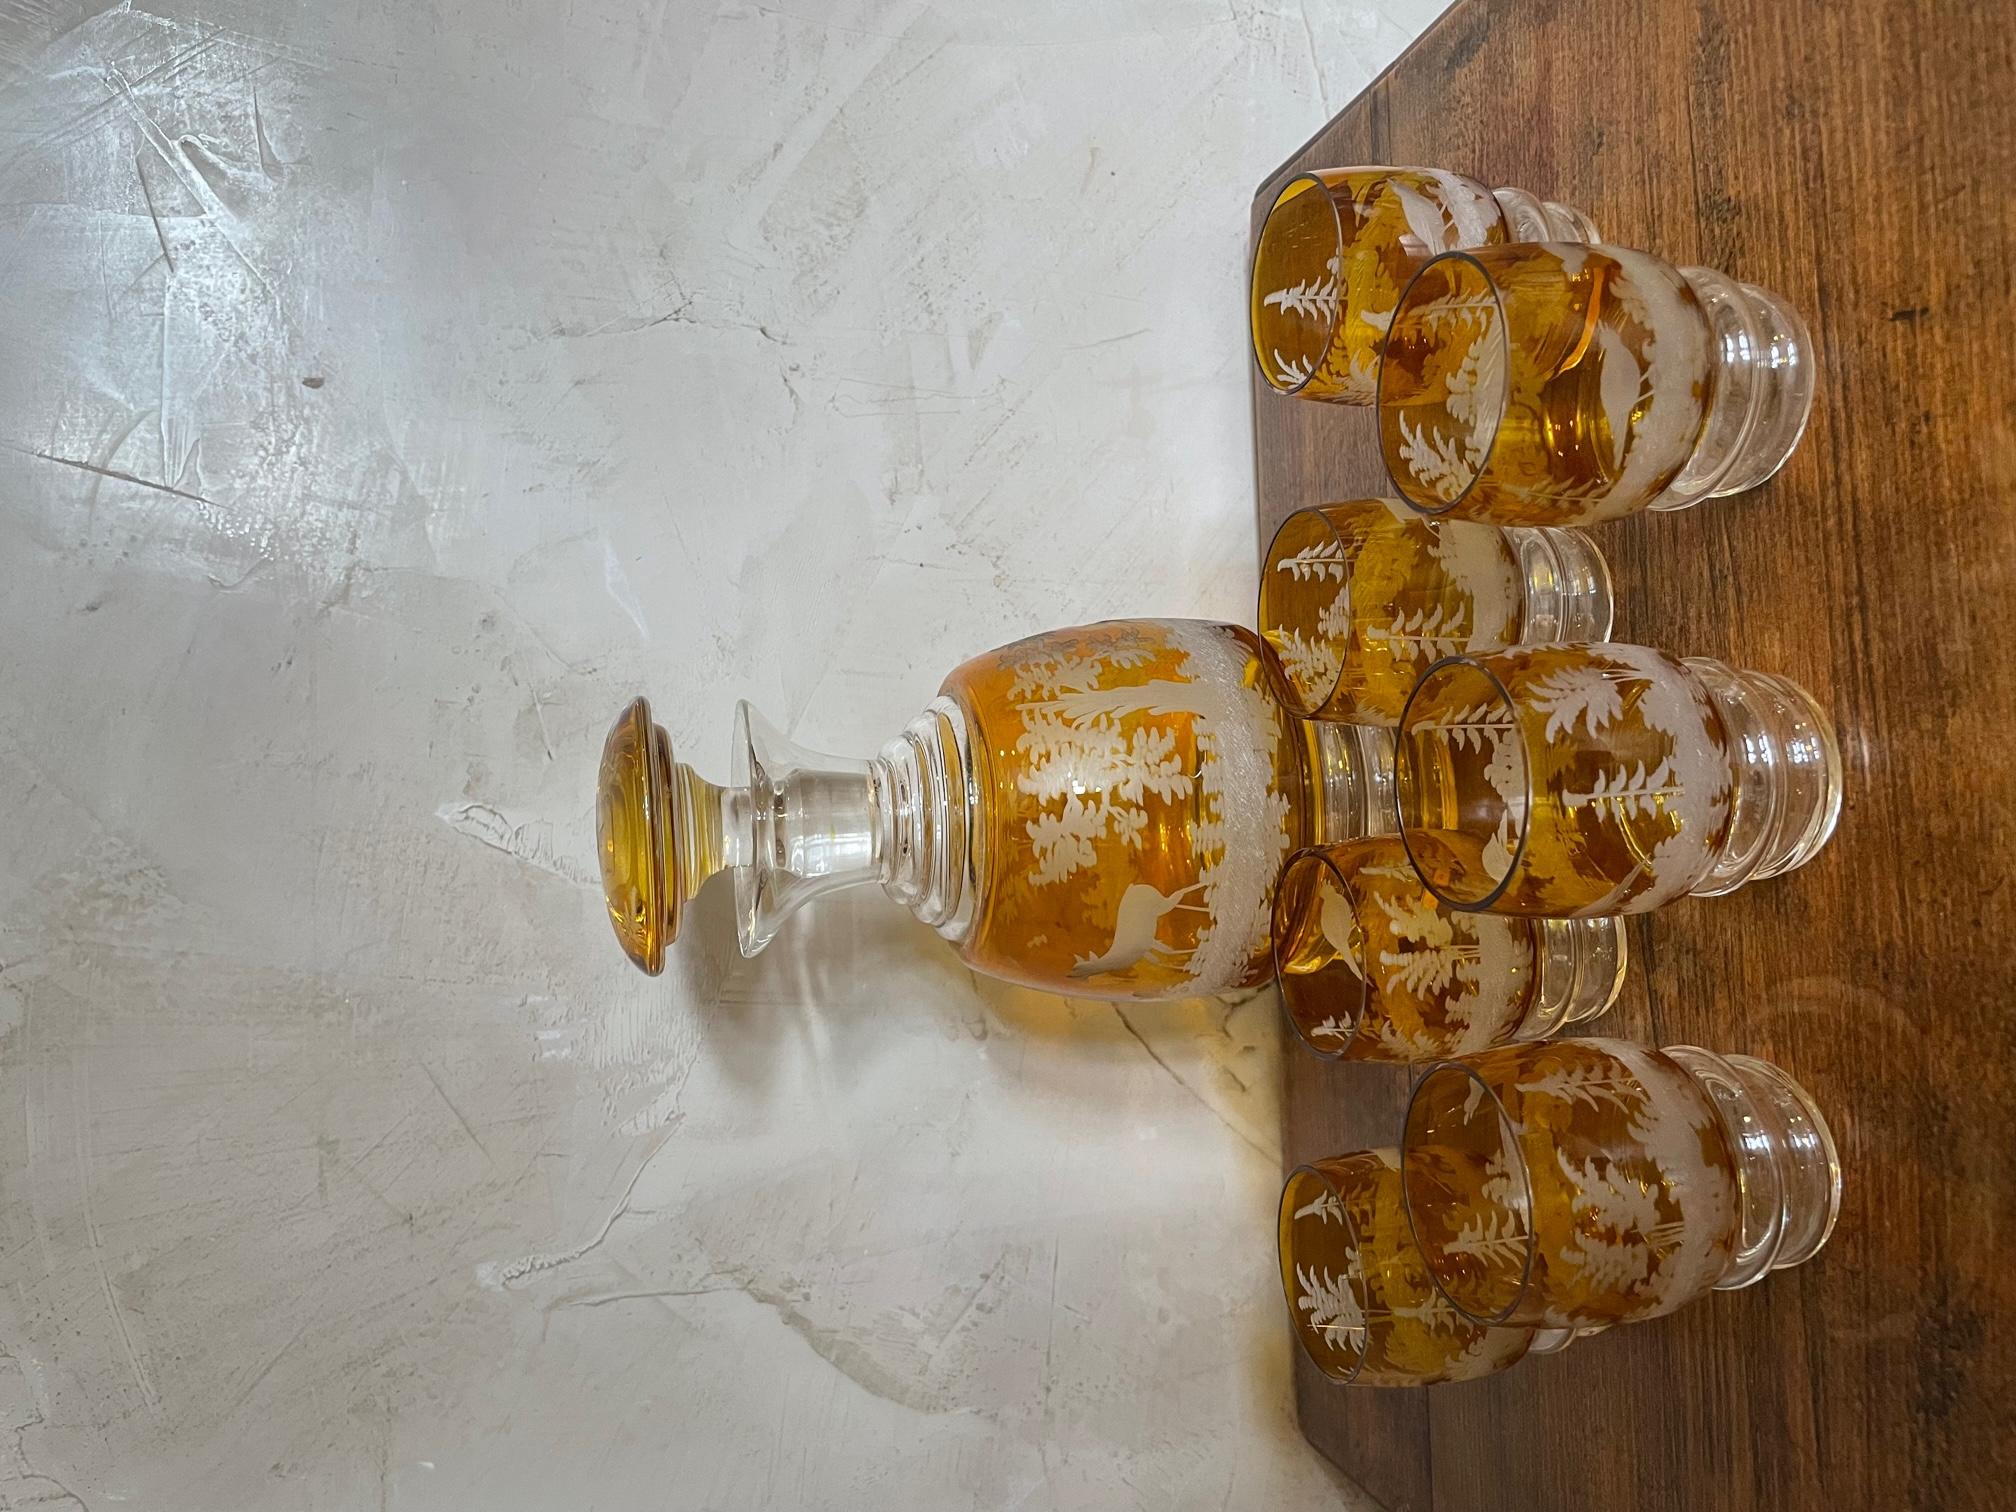 Magnificent liquor service in Bohemian crystal, orange color with landscape decor with engraved deer.
Dating from the beginning of the 20th century.
A decanter with its stopper and 7 liqueur glasses. 
Beautiful condition and very good quality.